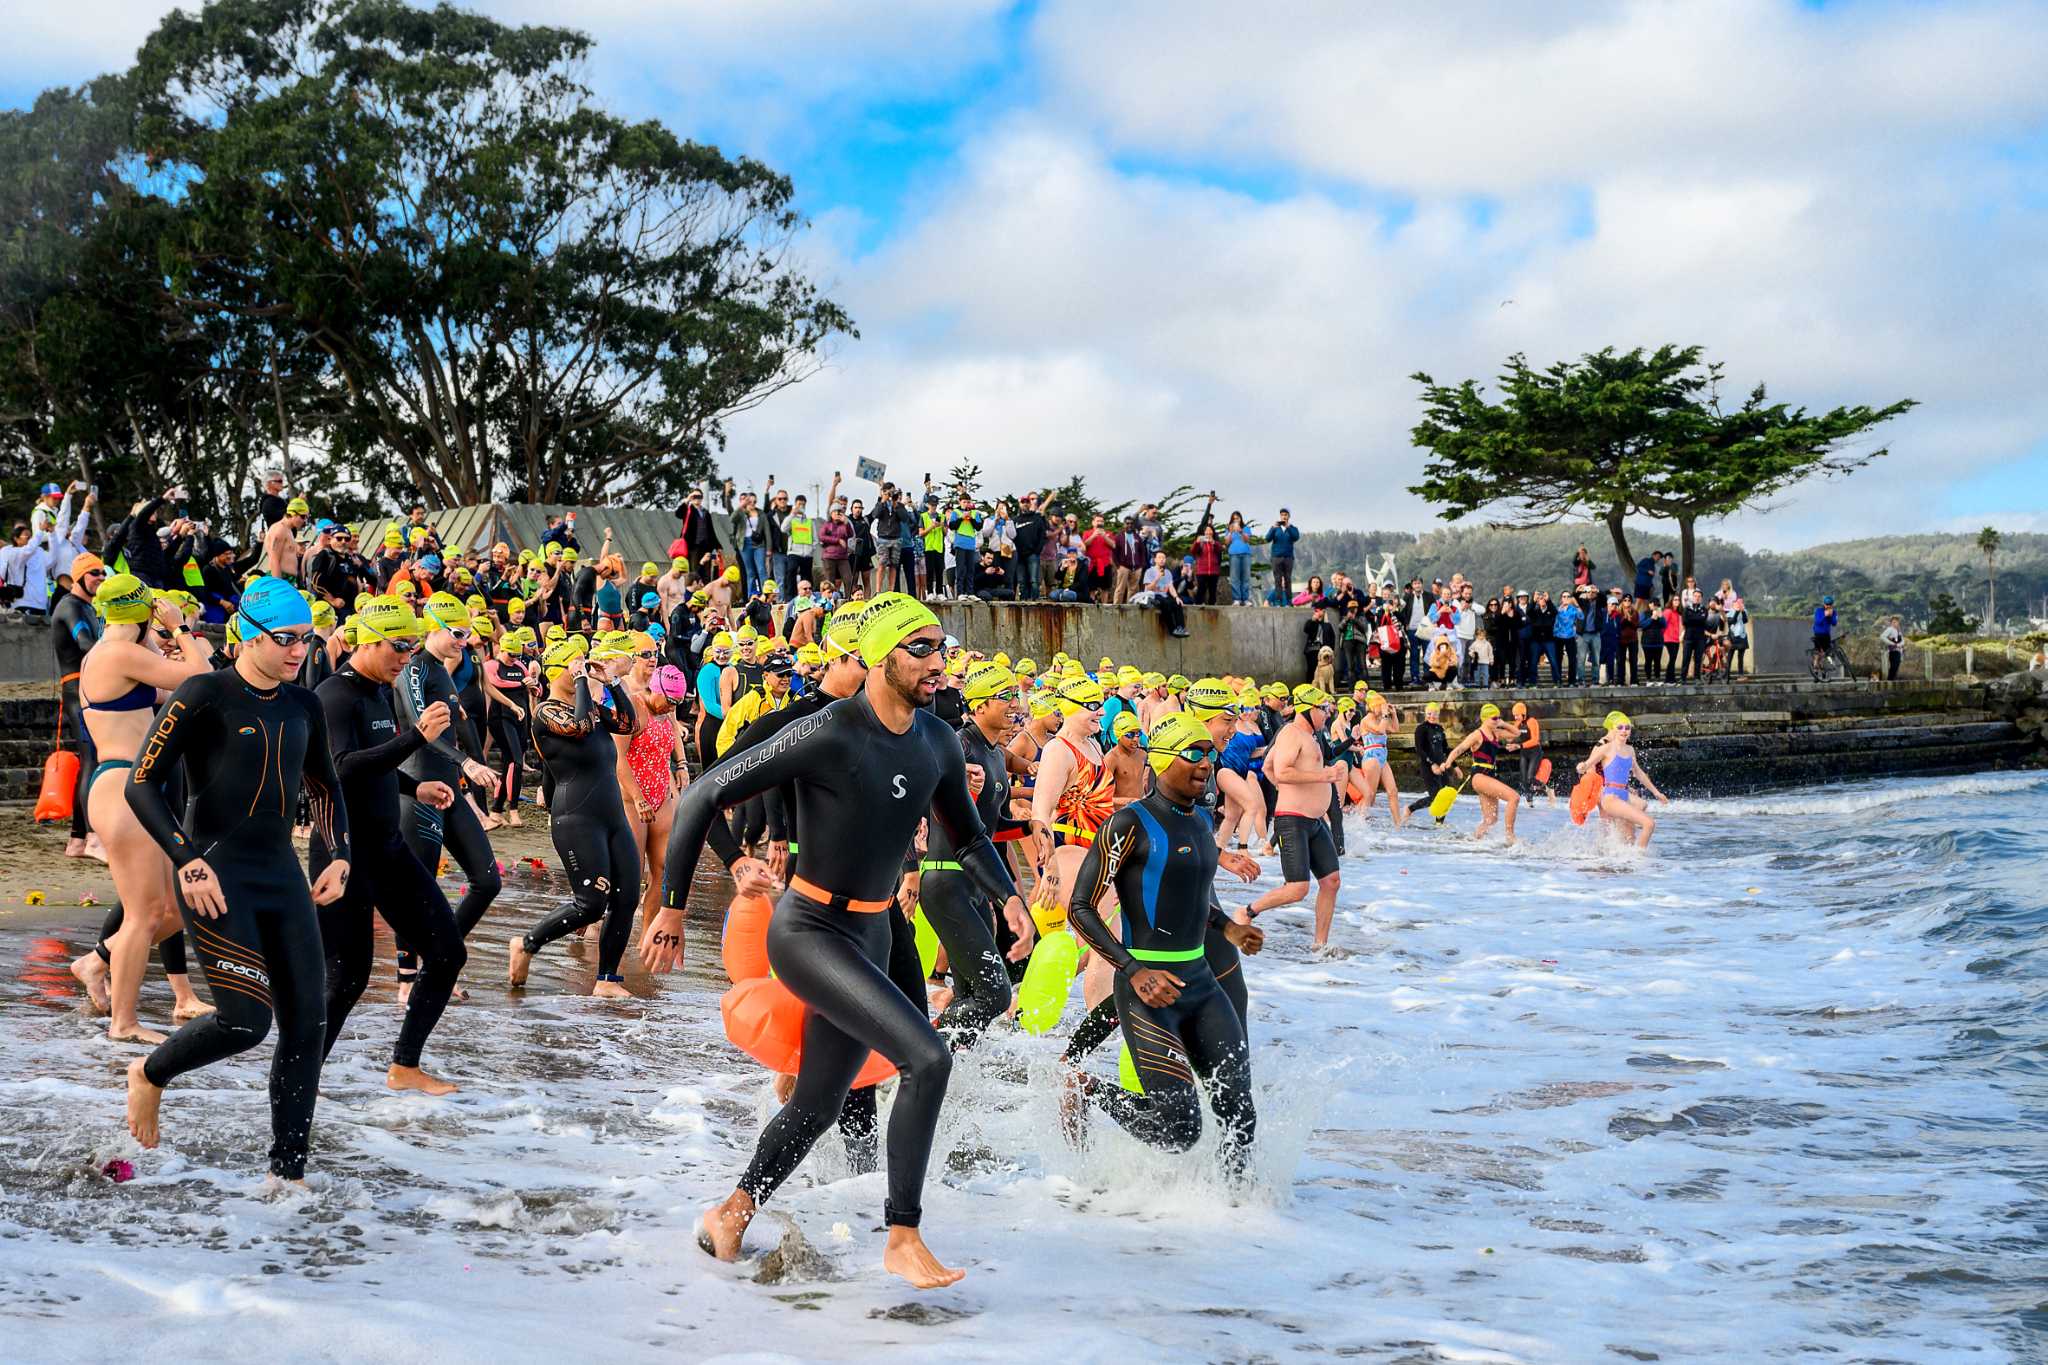 Swimmers transform SF Bay into sea of charity for cancer research